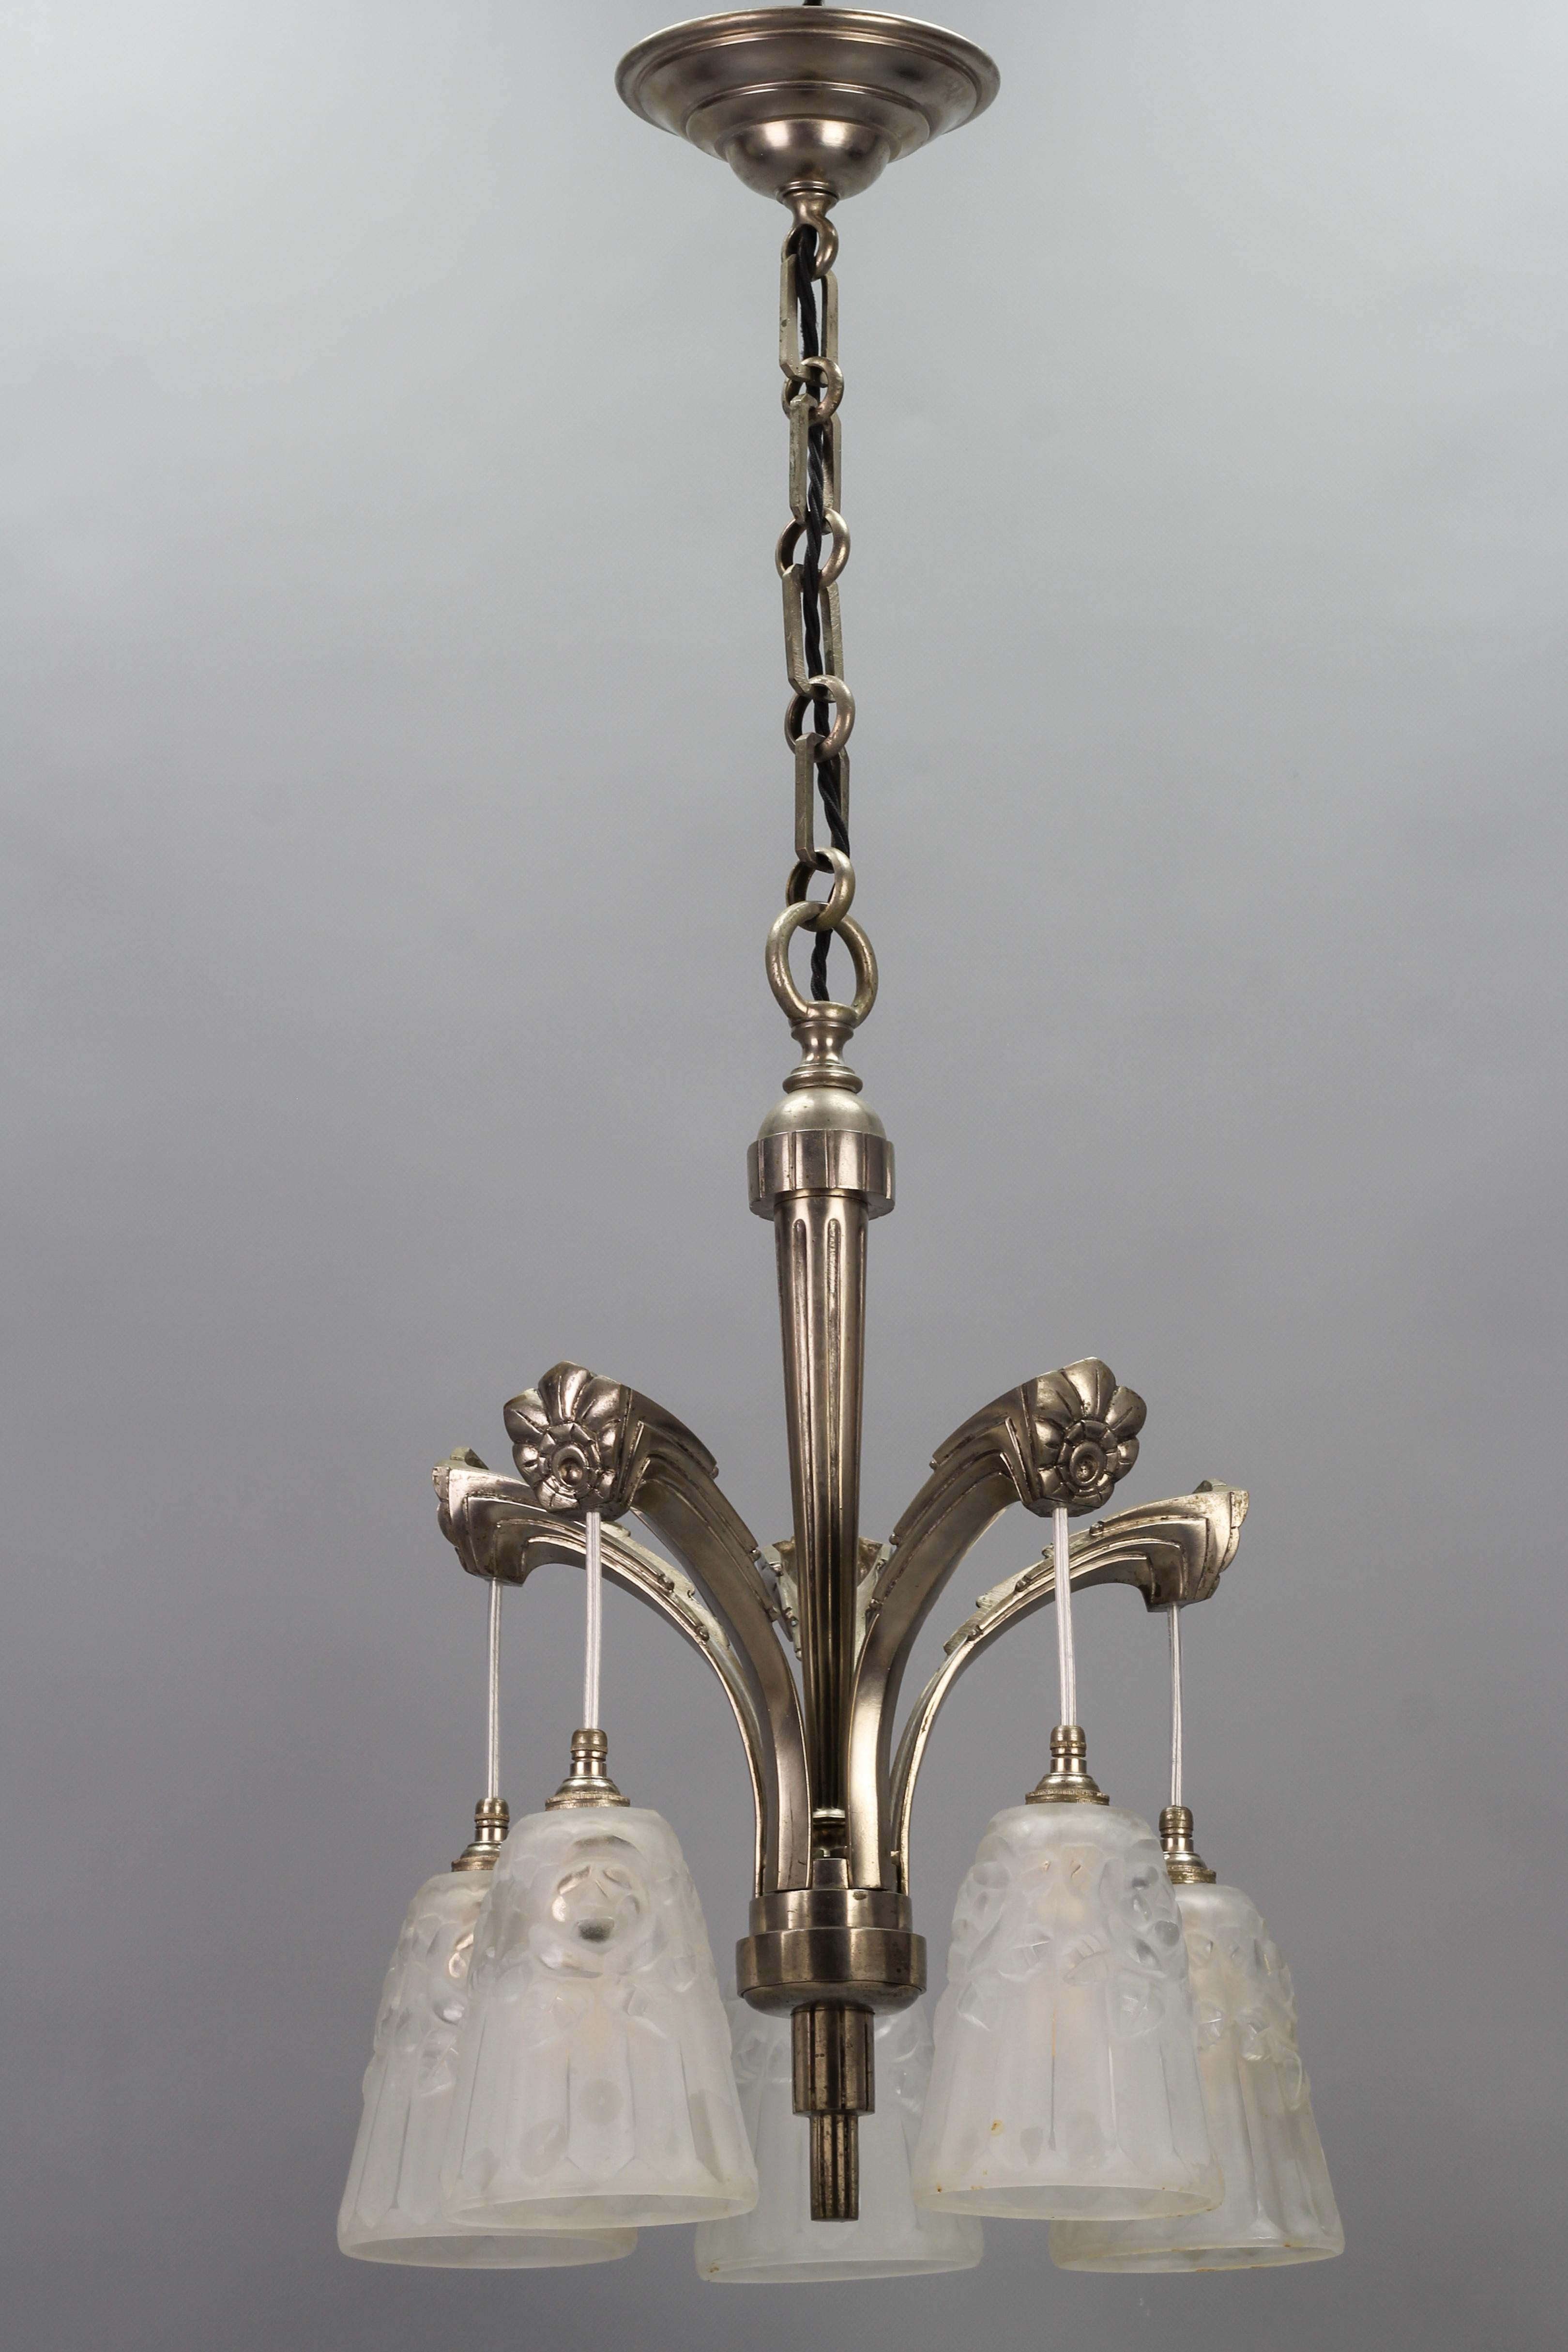 French Art Deco brass five-light chandelier with white glass by Degué, the 1930s.
This beautiful five-light chandelier features an elegant shape nickel-plated brass frame adorned with stylized Art Deco flower ornaments. Five frosted glass white